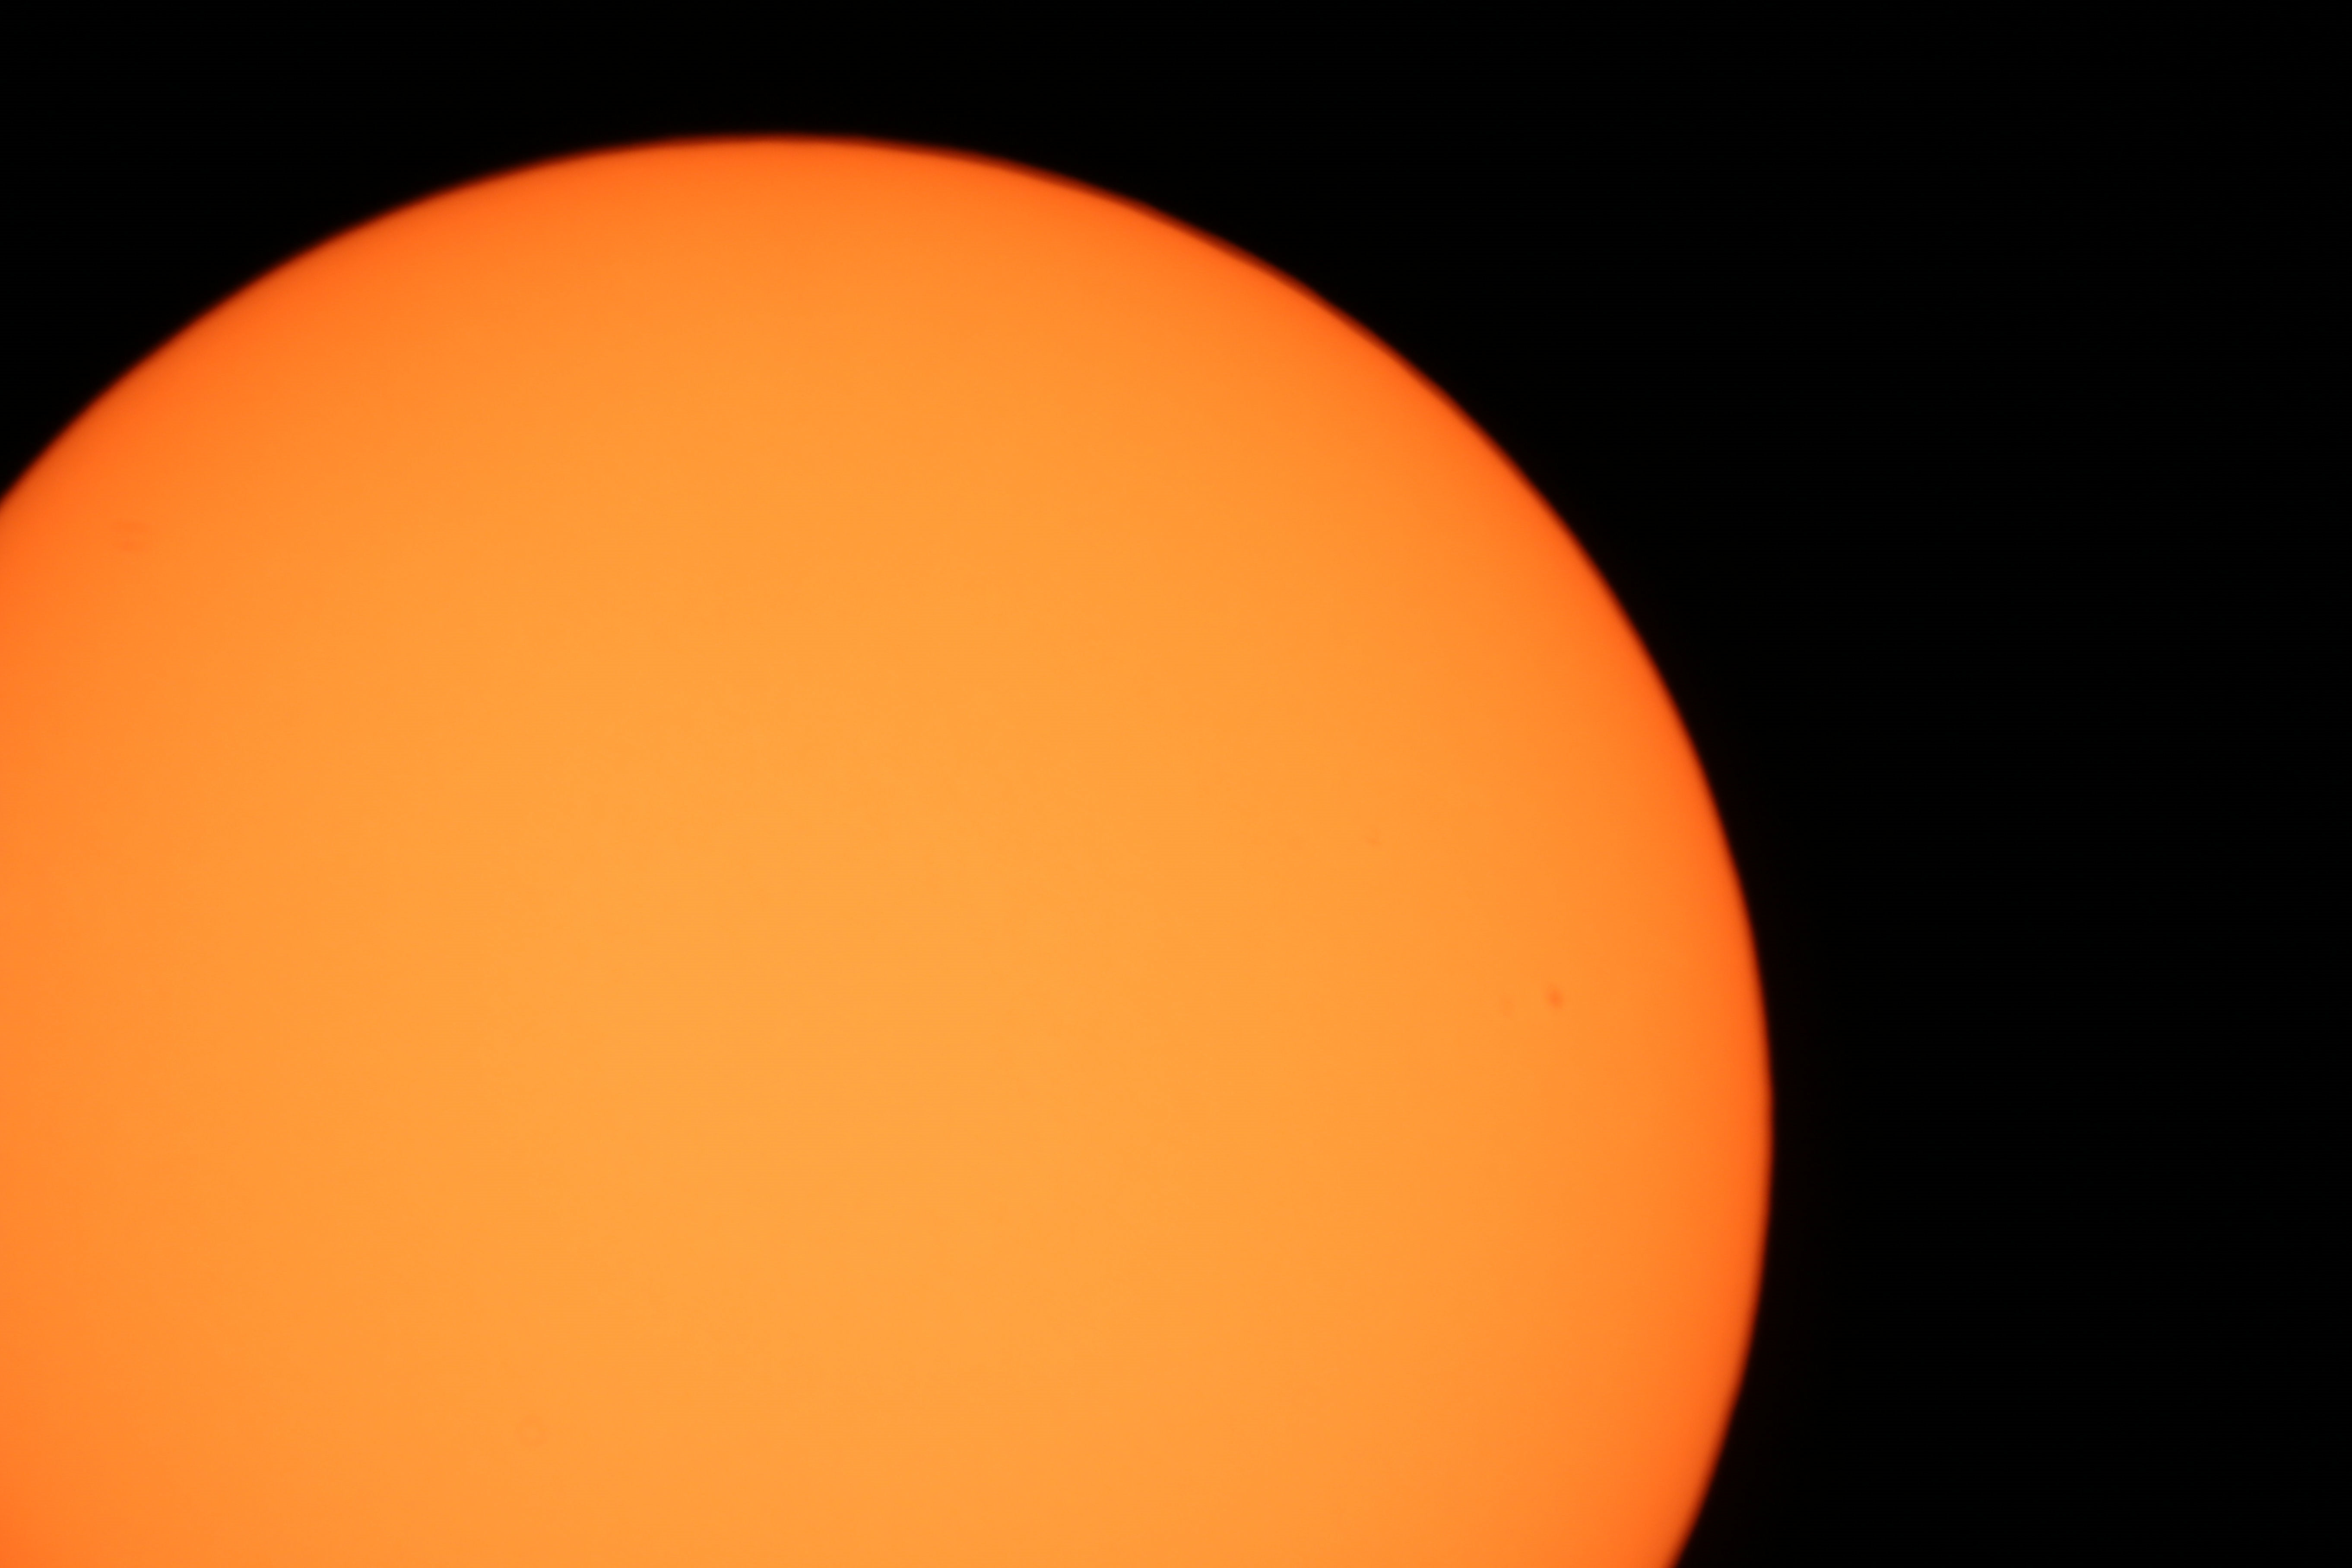 Sol by Jim Barber undated. Canon 70d 1/60 the on the 8" sct.  "This photo is through a solar filter, I took this image and selected the complimentary colour to enhance the sunspot to make it clearer."